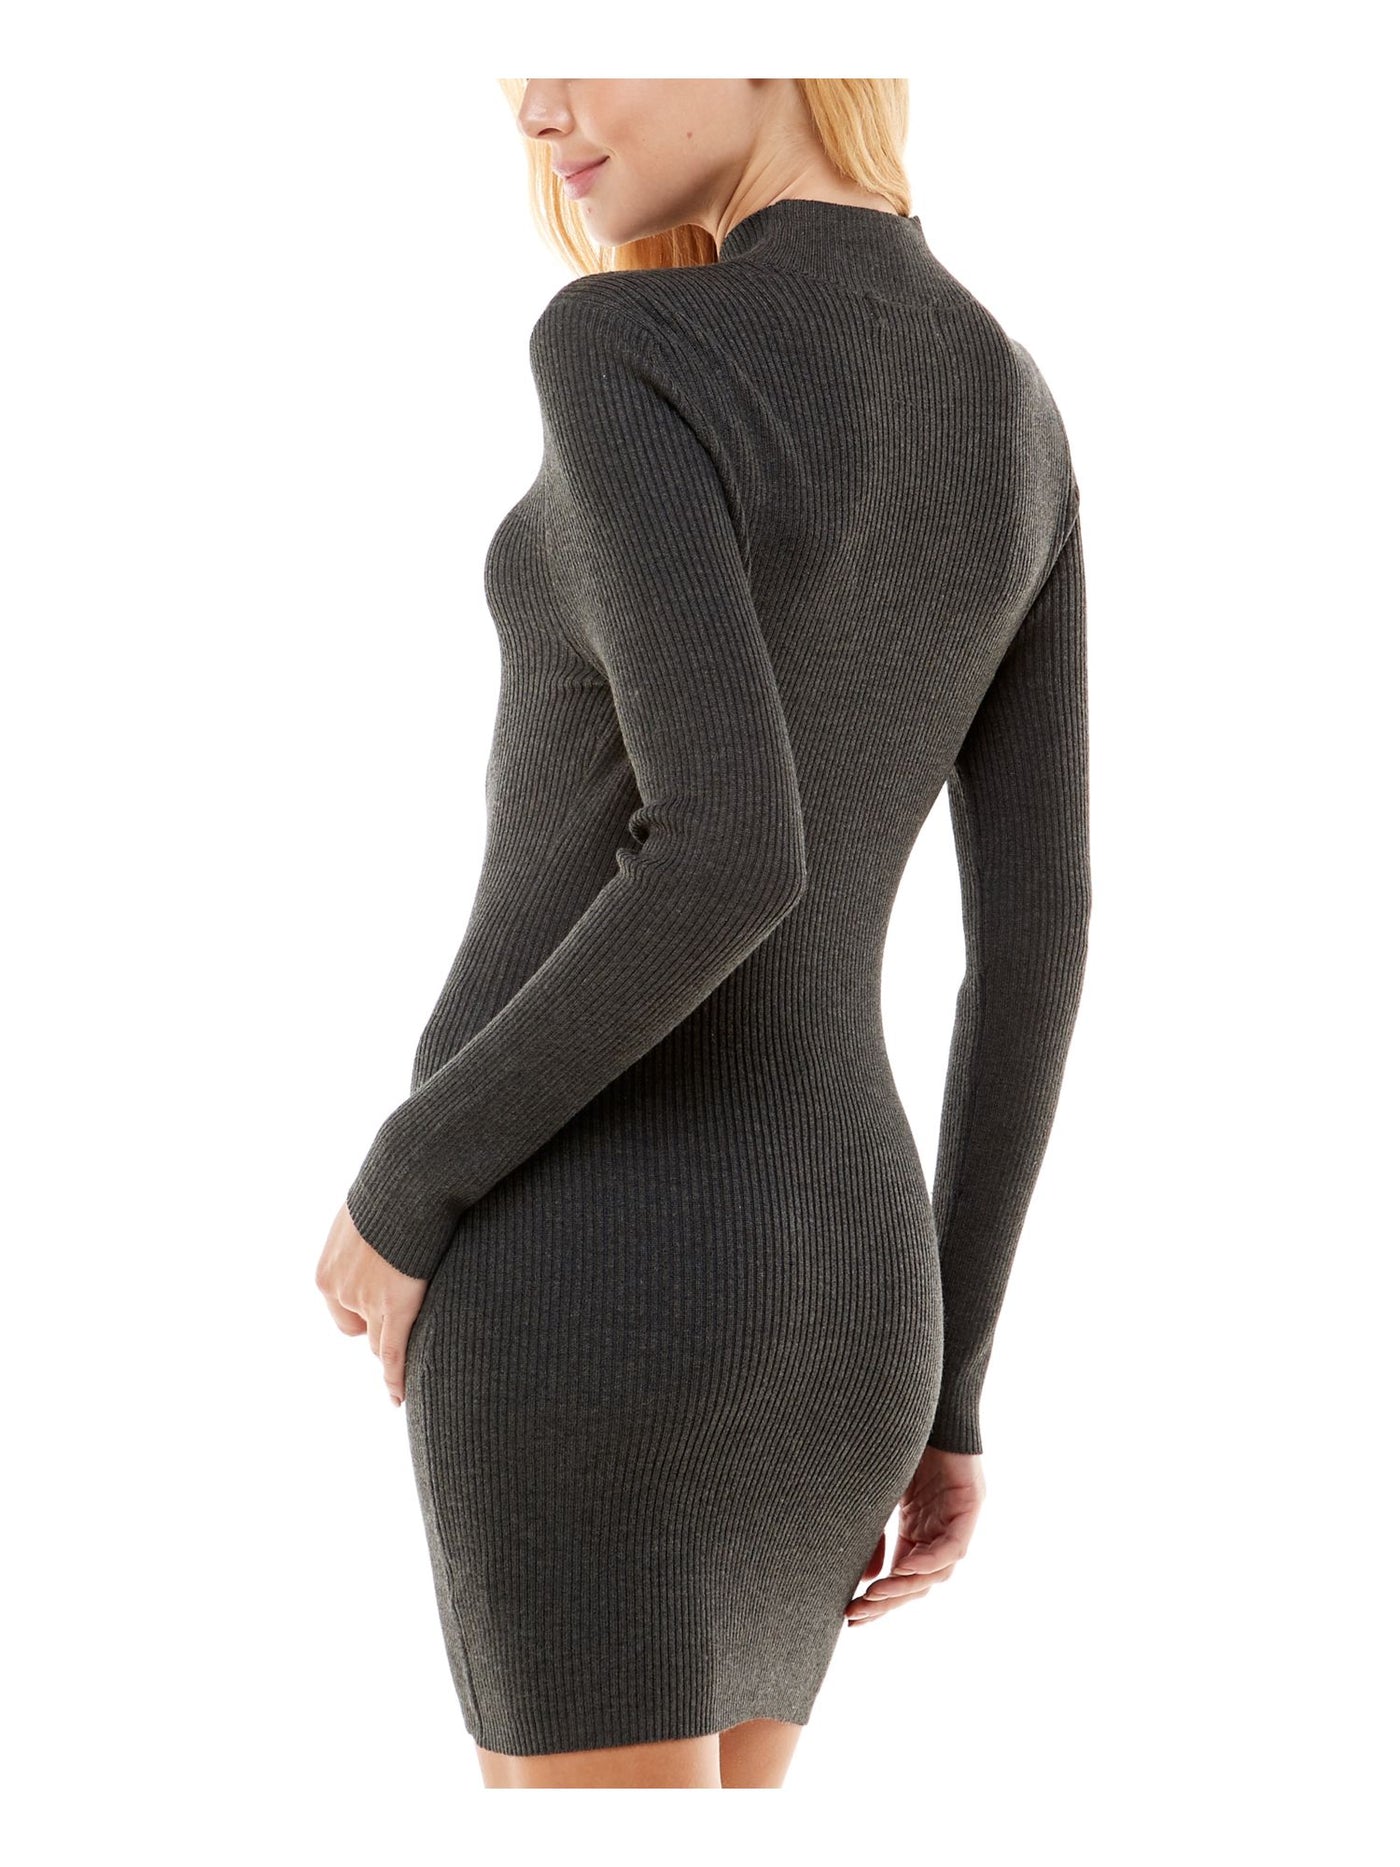 NO COMMENT Womens Gray Ribbed Cut Out Long Sleeve Mock Neck Short Party Sweater Dress Juniors L